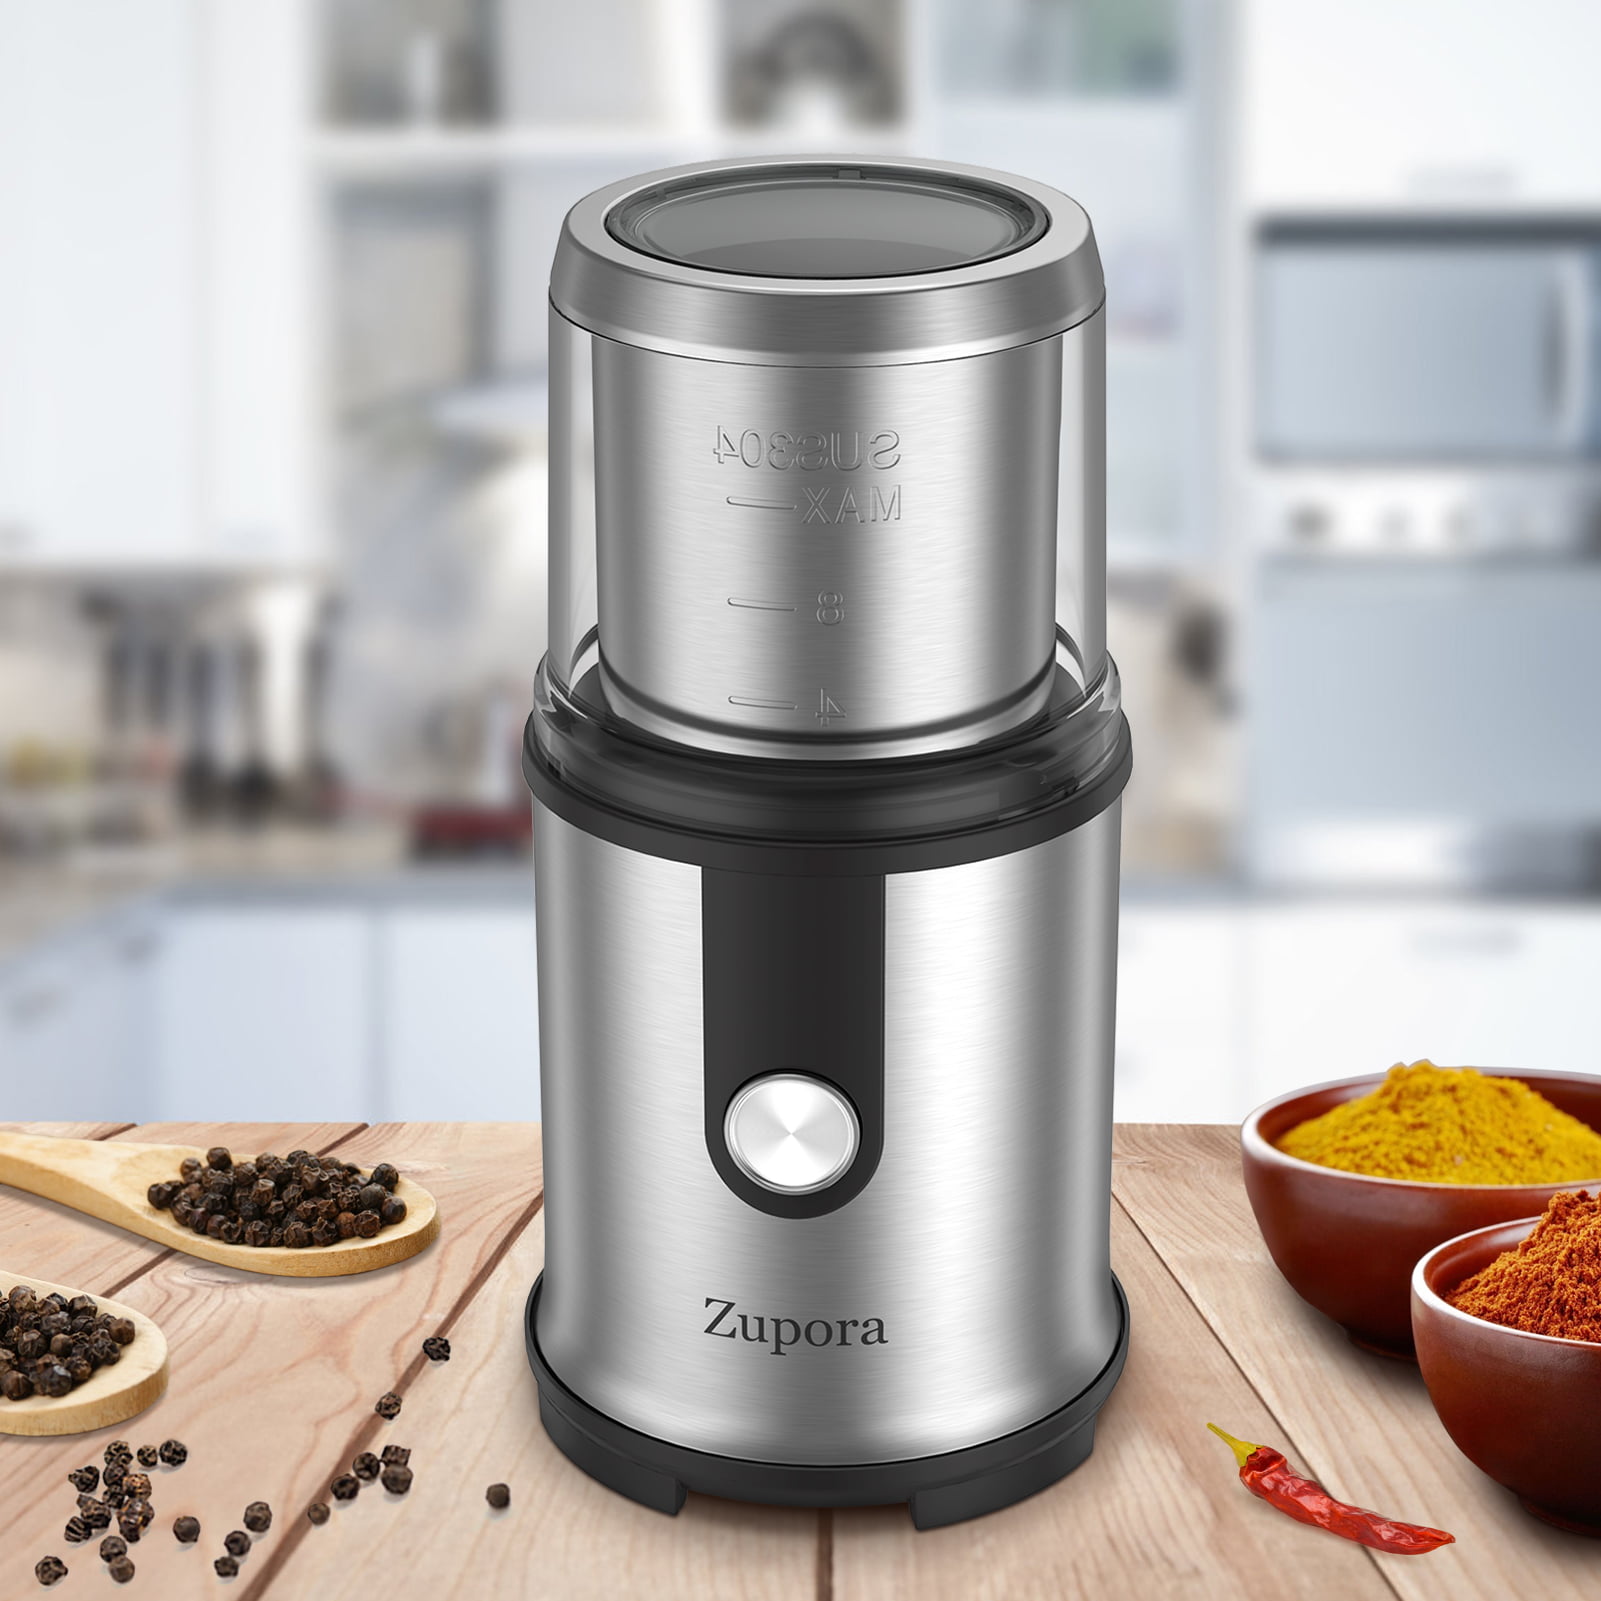 Grain Grinder for Dry or Wet Grinding for Home Kitchen Coffee Beans Coffee Grinder Electric,Multifunctional Spice Grinder,Removable Stainless Steel Bowl